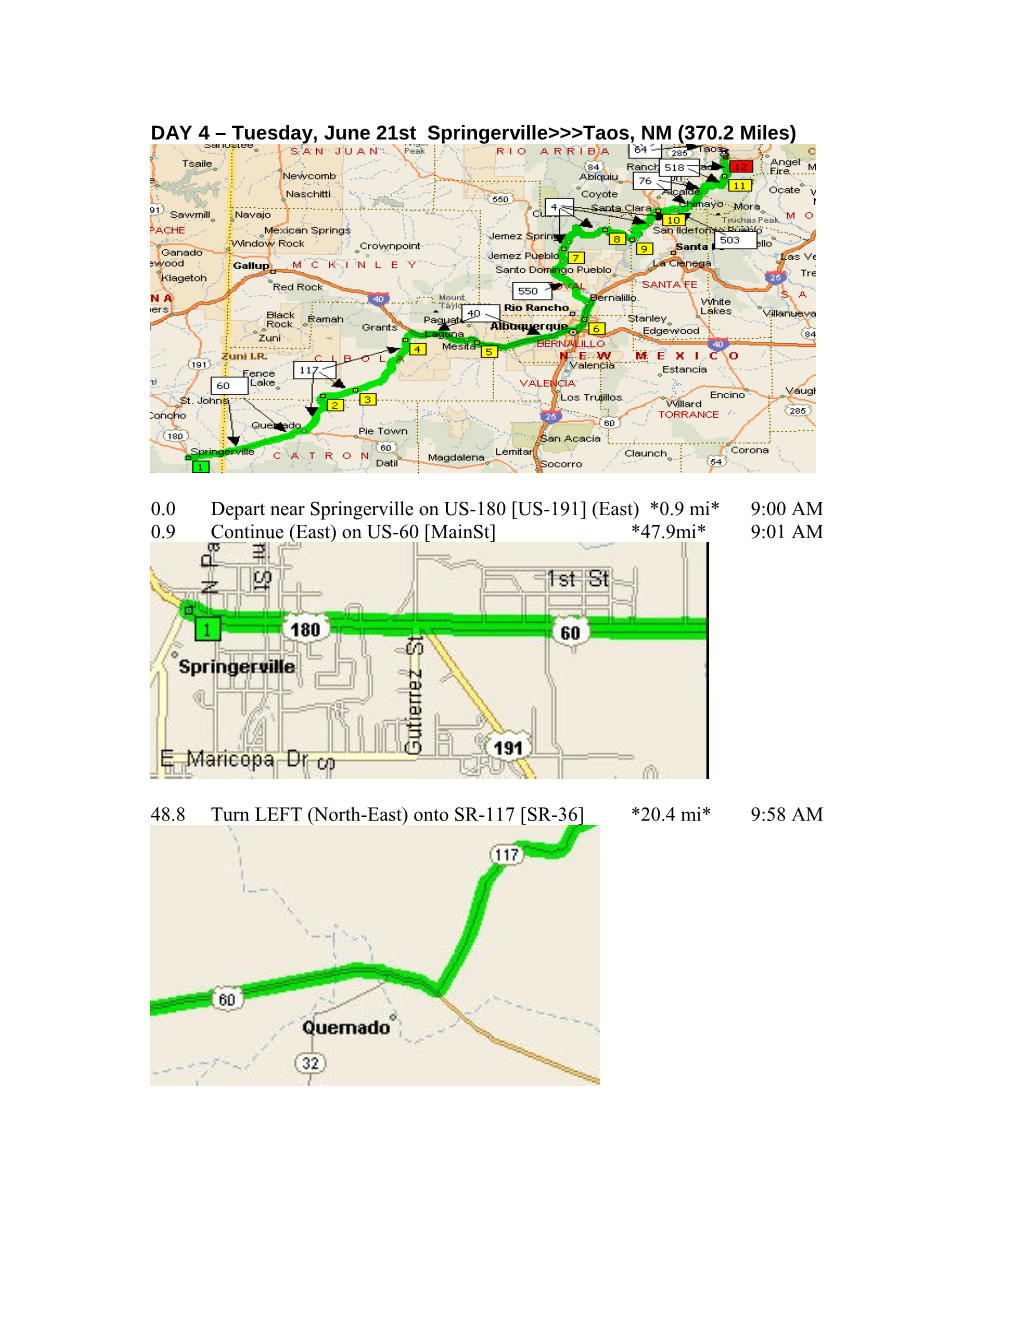 DAY 4 Tuesday, June 21St Springerville&gt;&gt;&gt;Taos, NM (370.2 Miles)